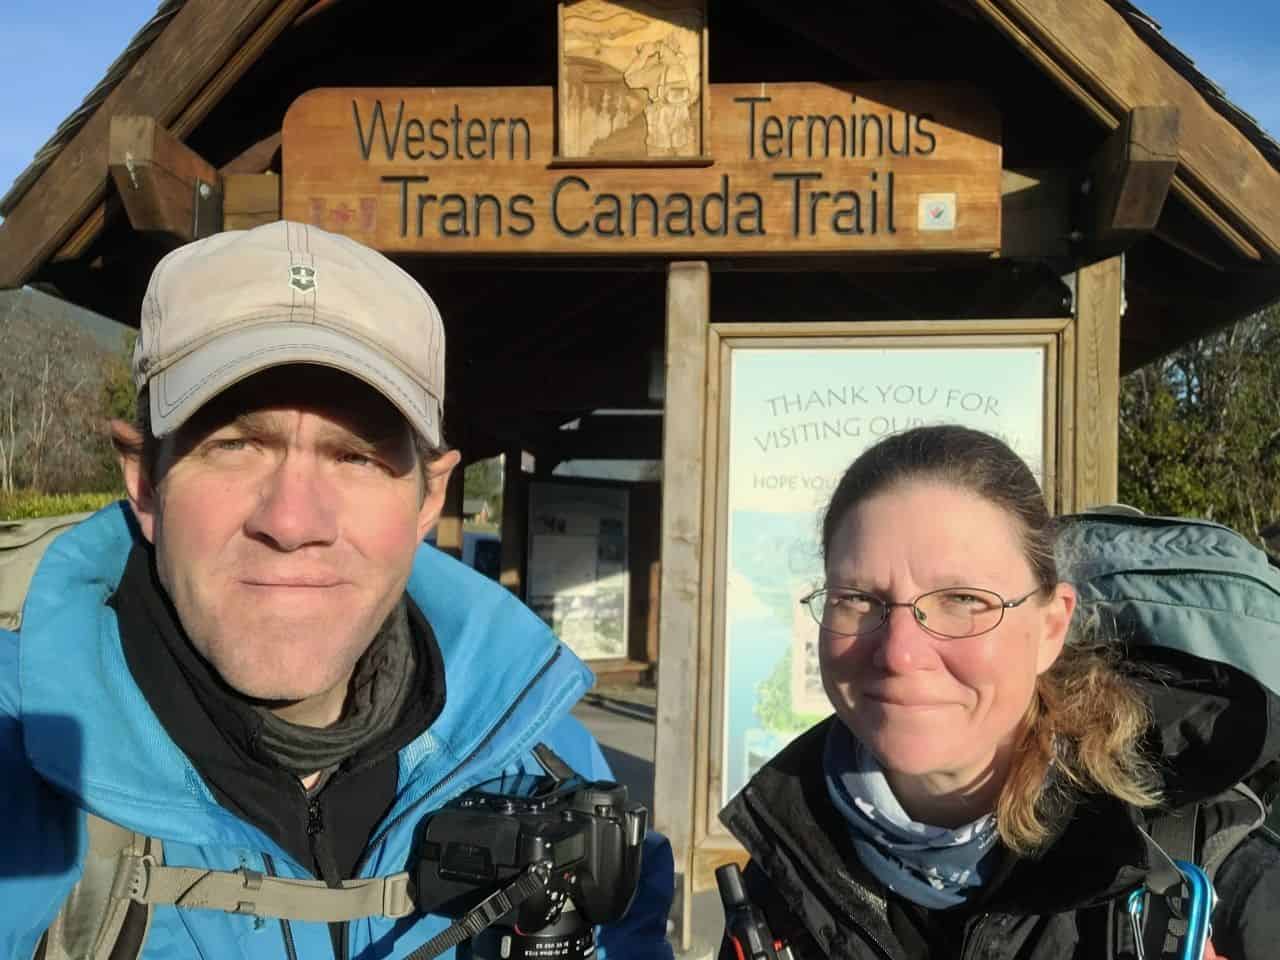 Duirng our #Hike4Birds across Canada on the Trans Canada Trail, we discovered some hidden gems while birding British Columbia.